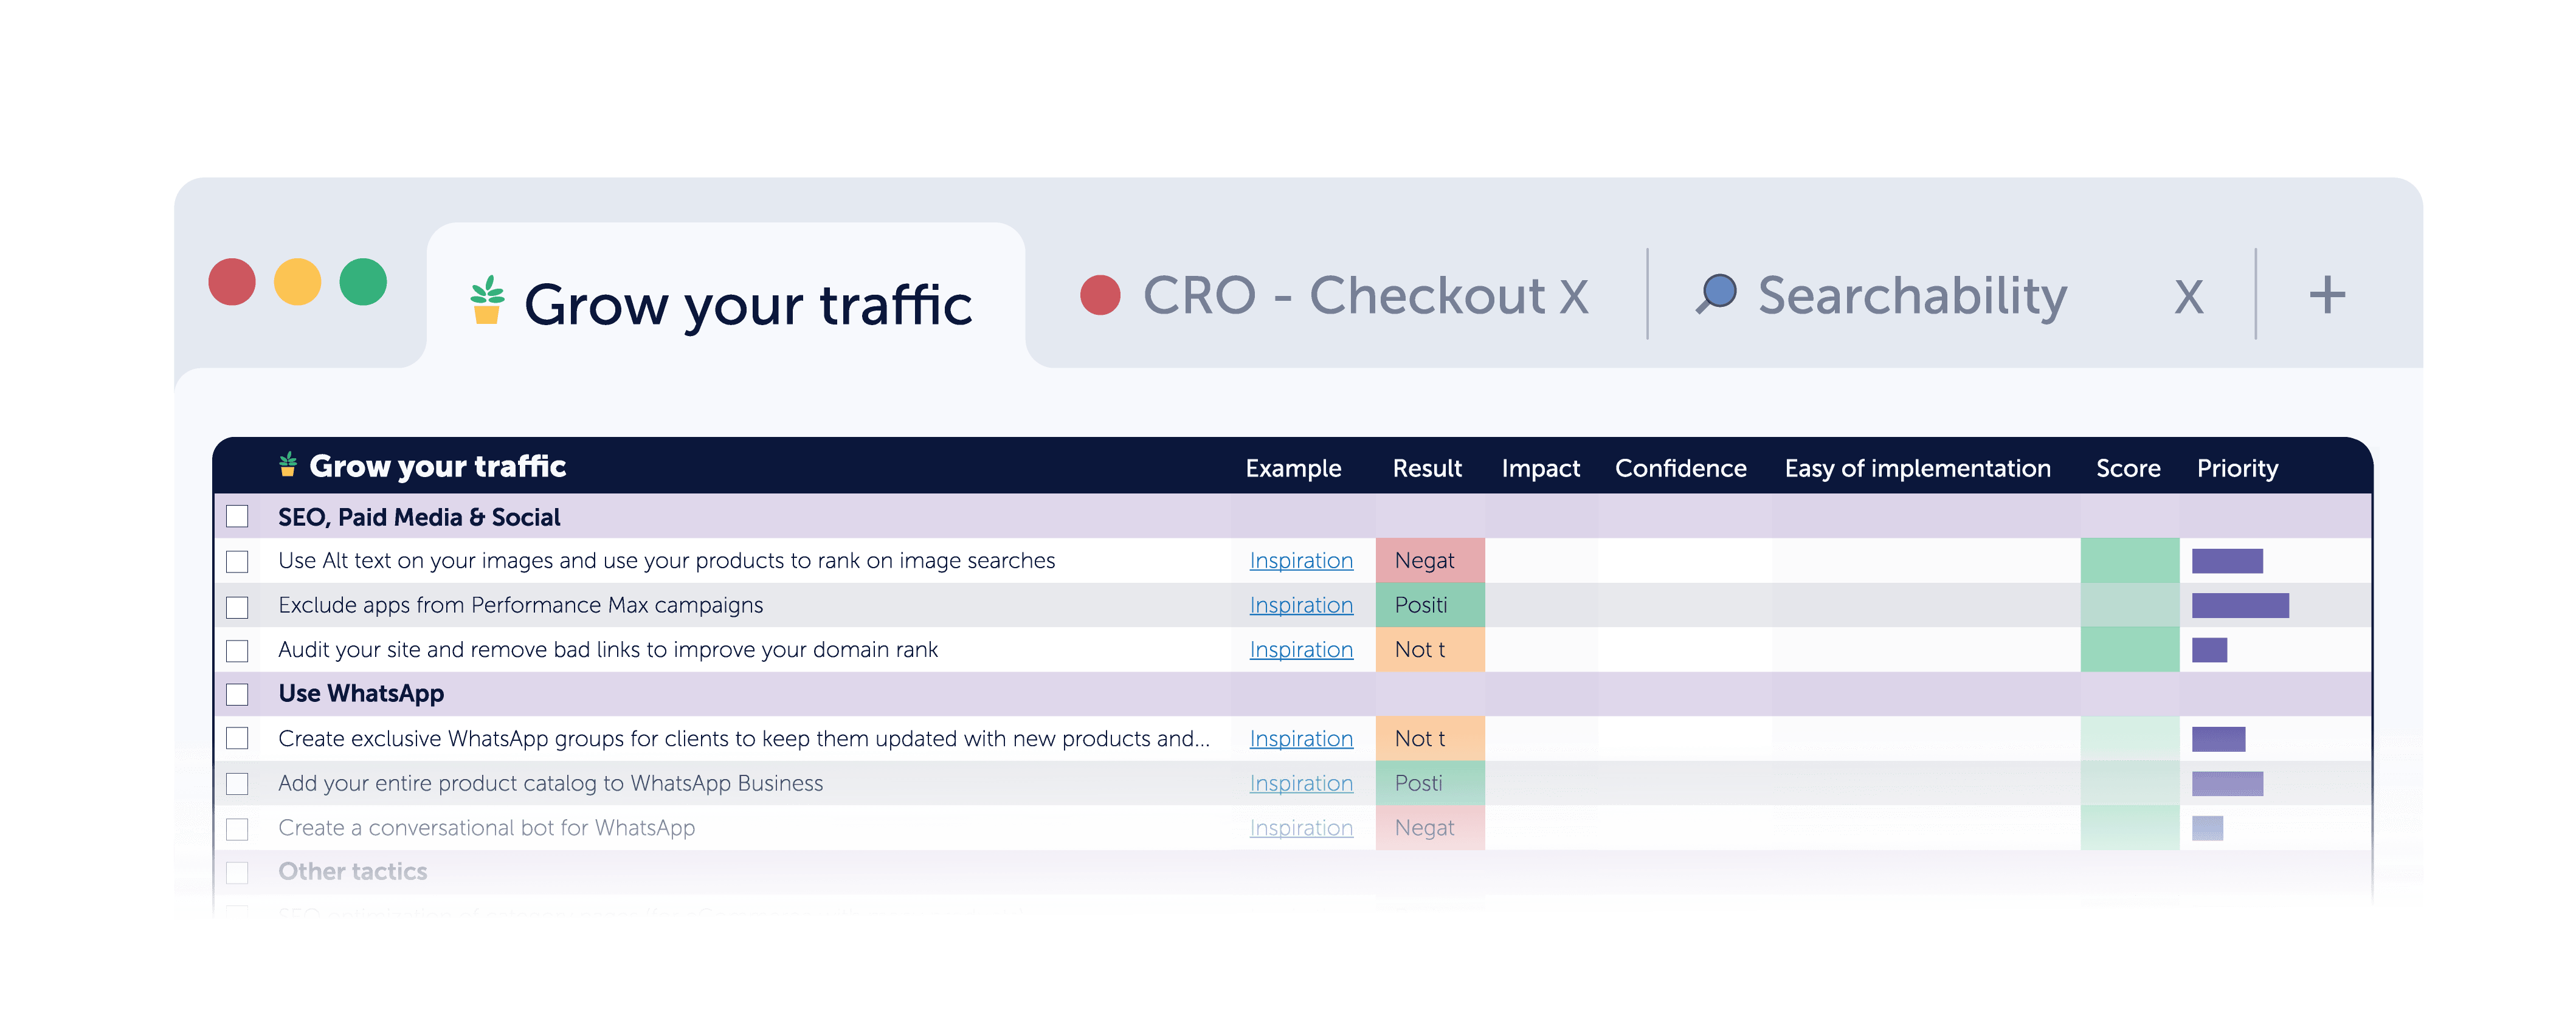 A stylized excel sheet with the ecommerce checklist